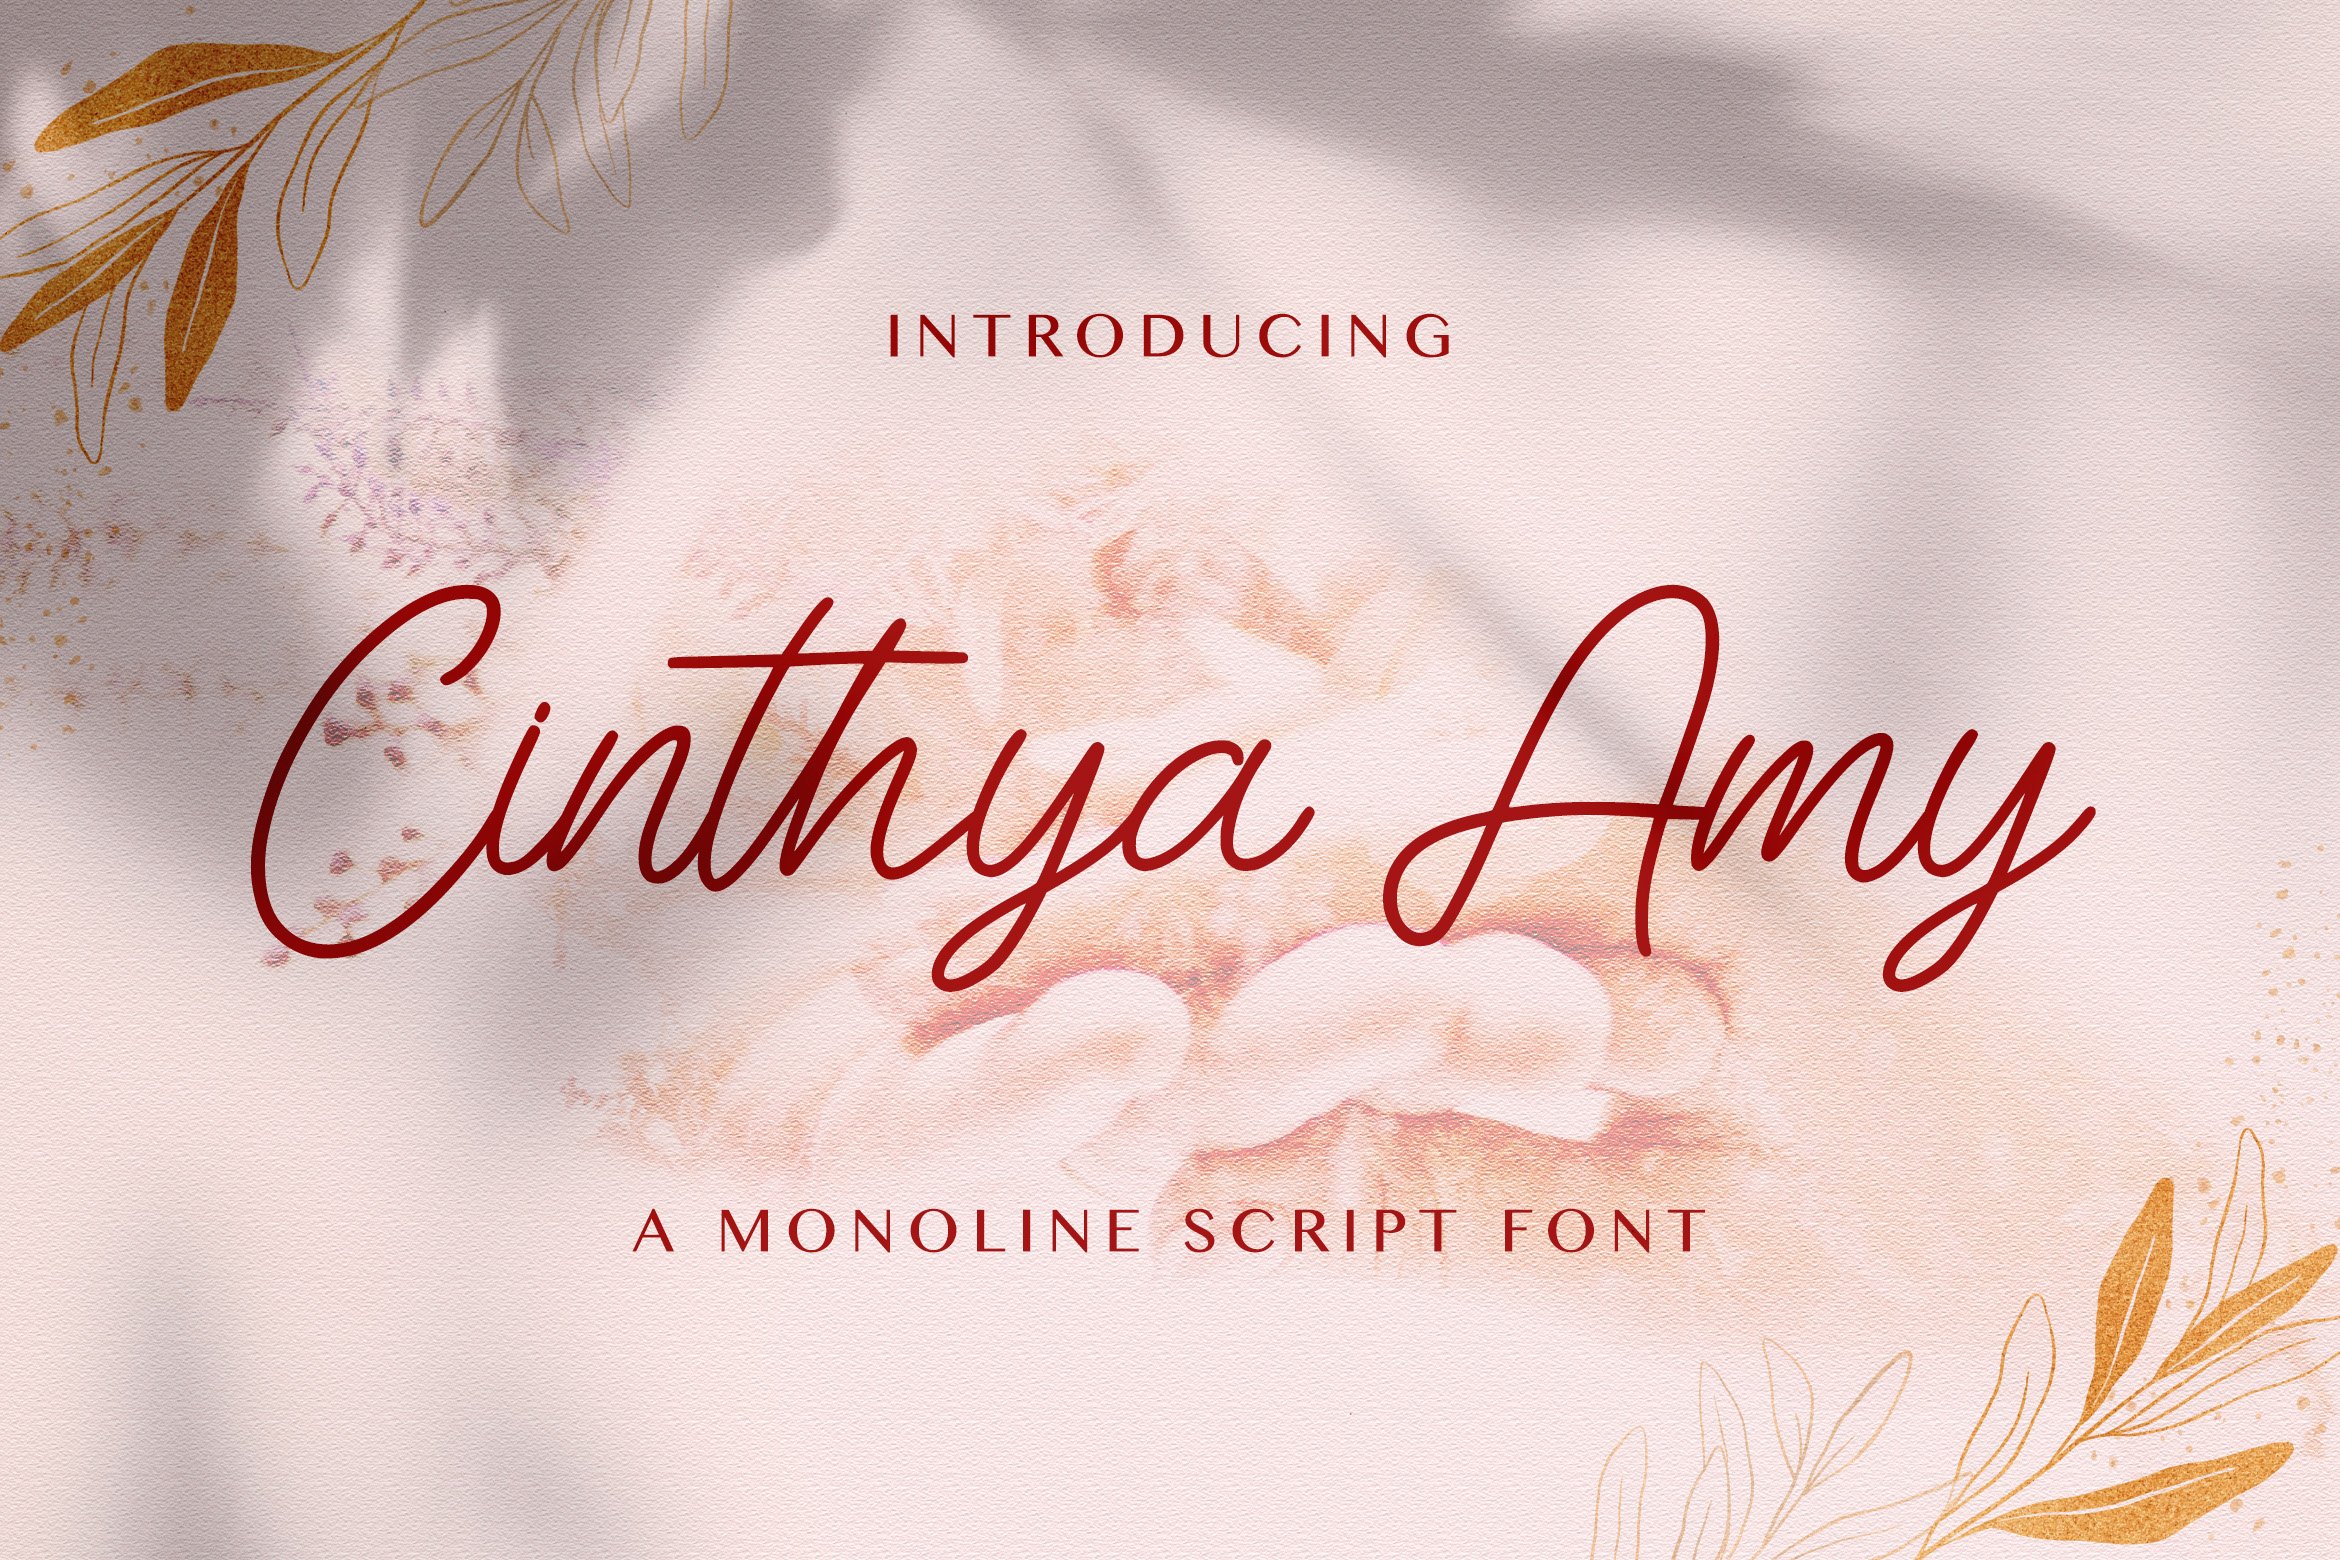 Cinthya Amy - Handwritten Font cover image.